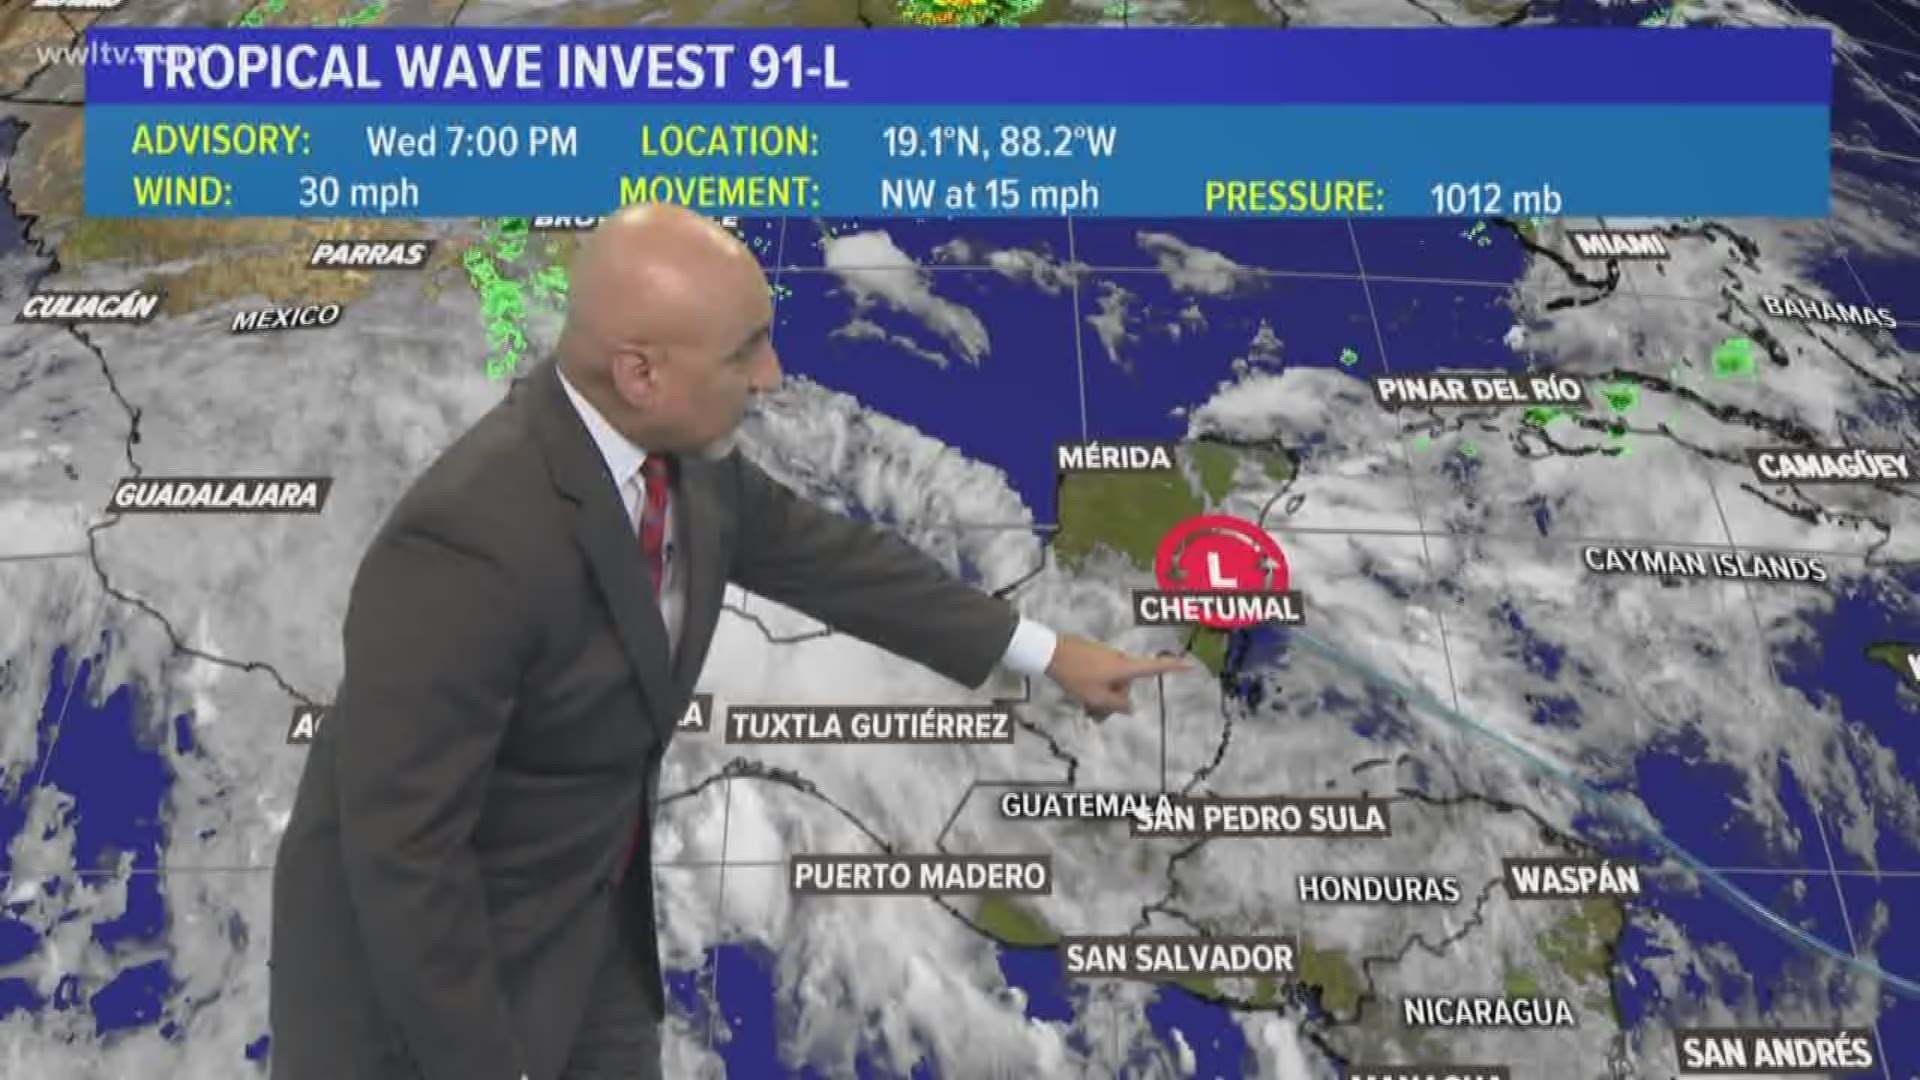 Chief Meteorologist Carl Arredondo and the Wednesday night Tropical Update